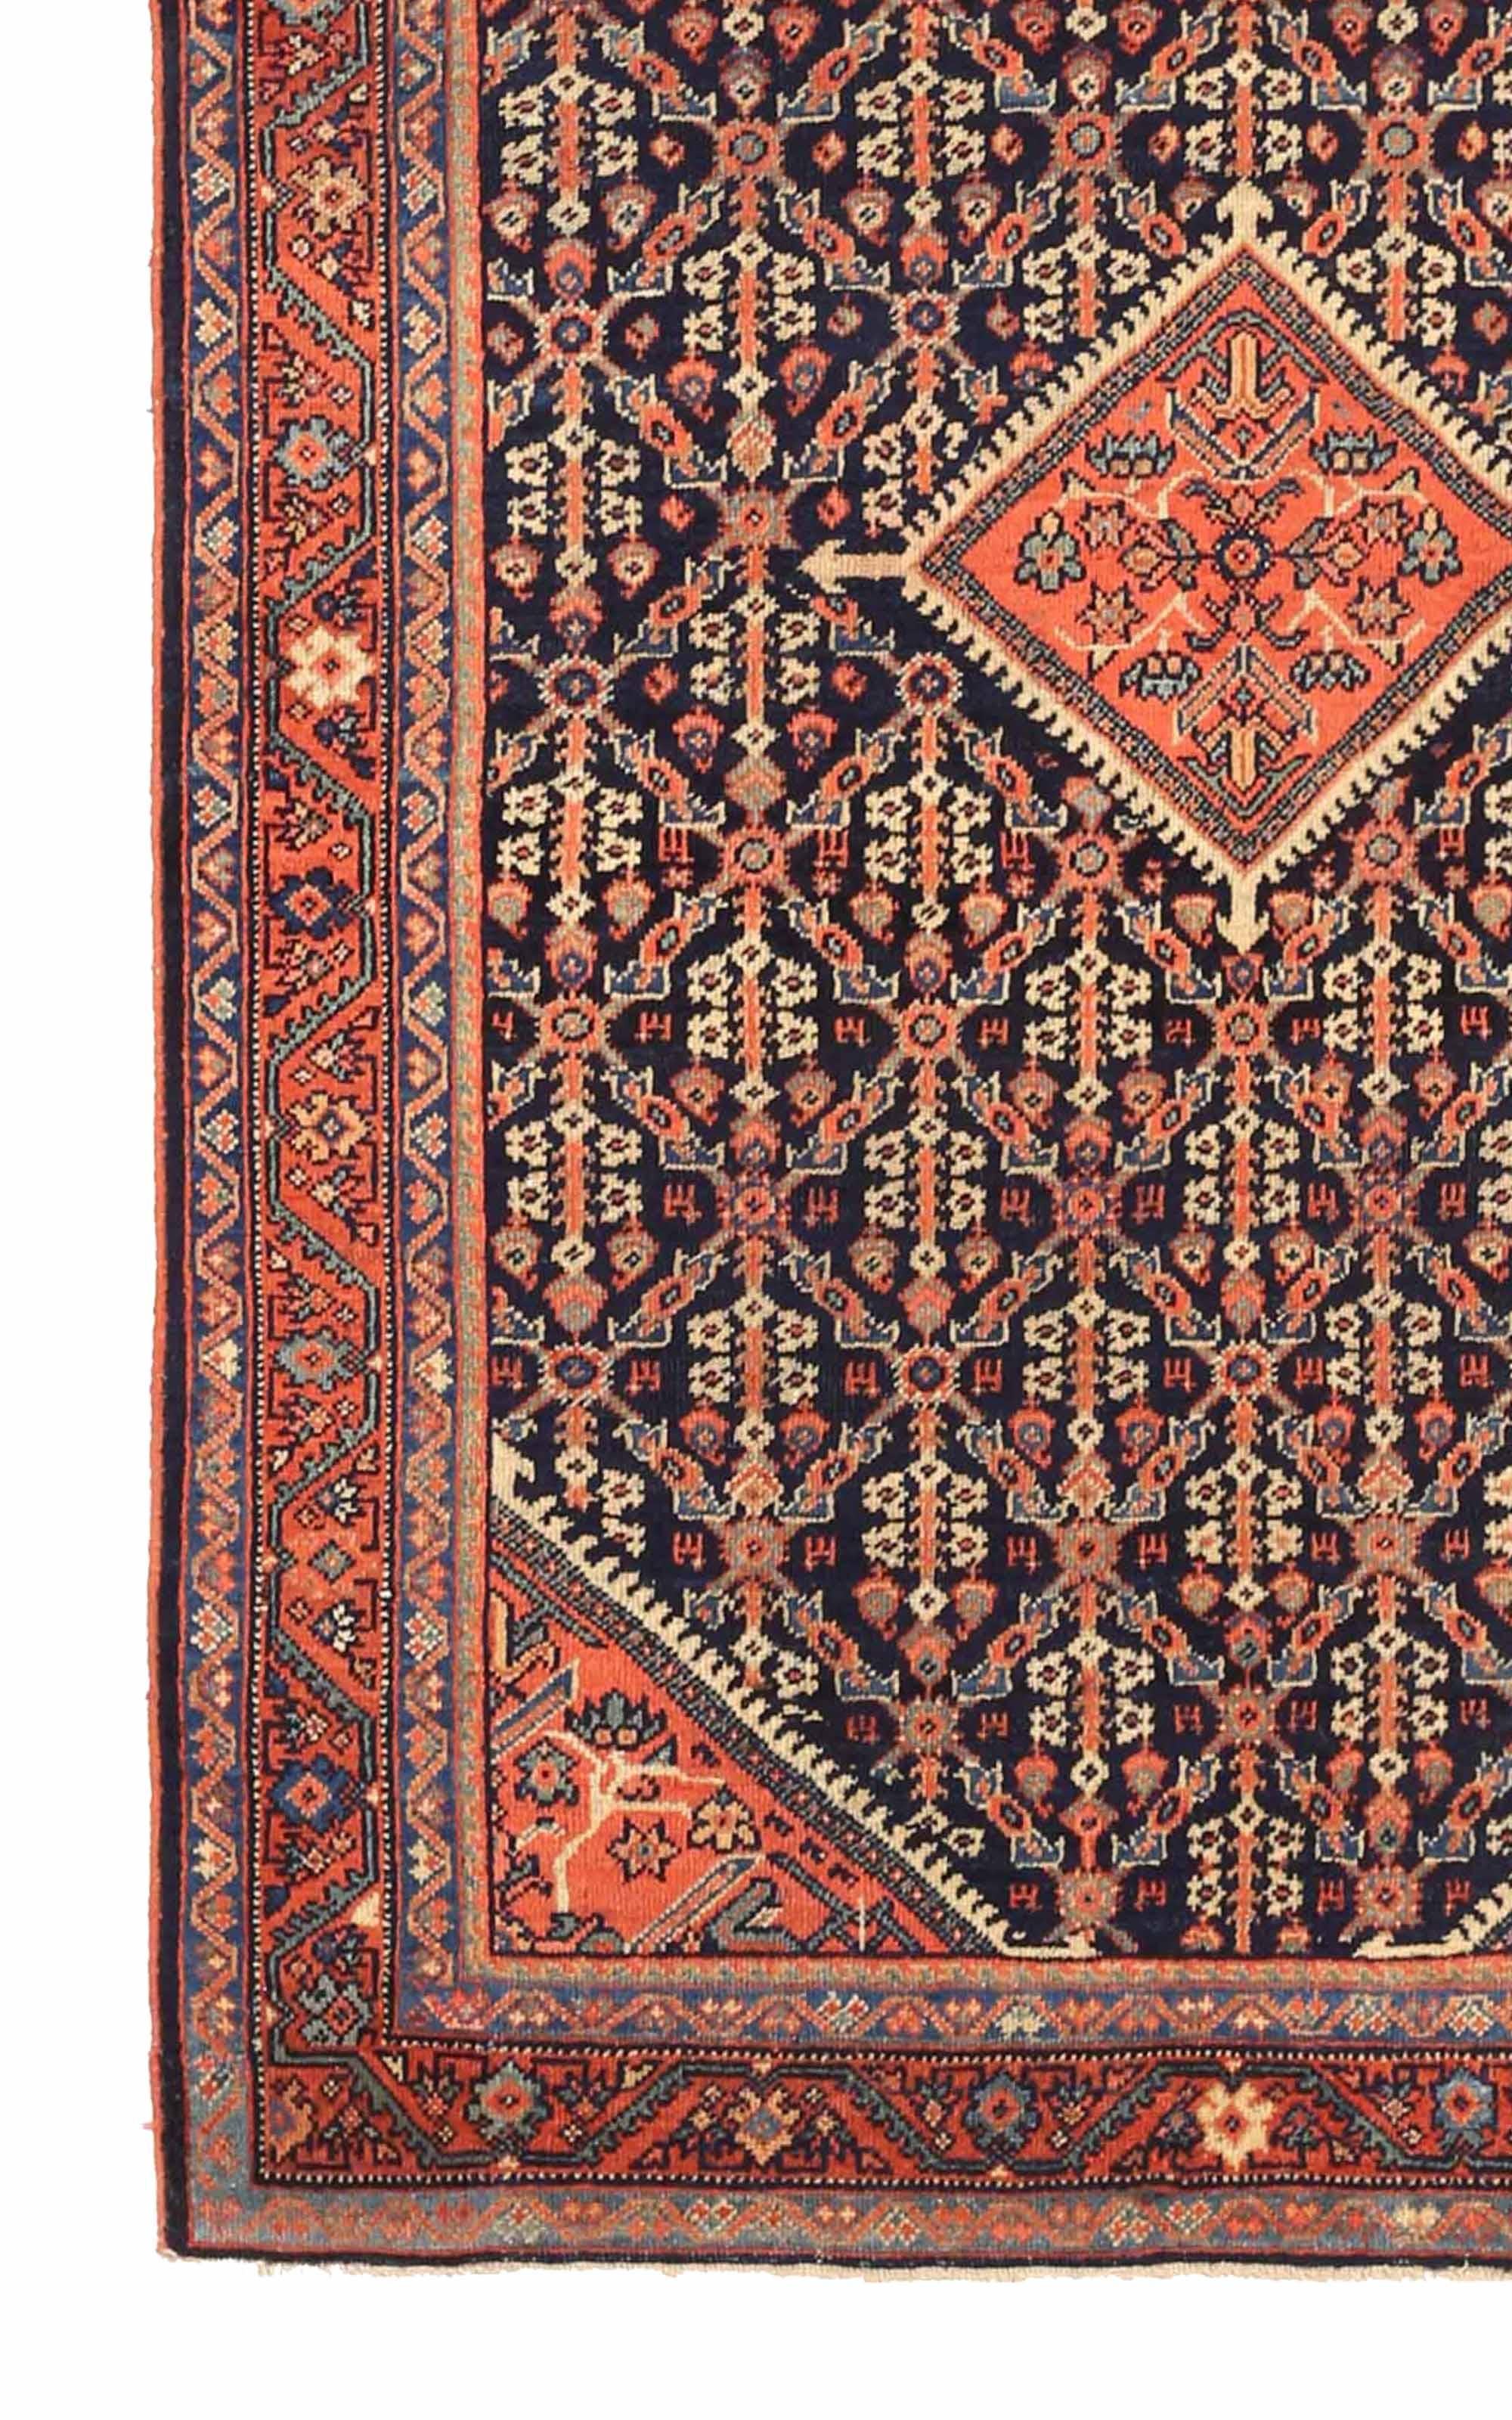 Other Antique Persian Area Rug Meshkabad Design For Sale